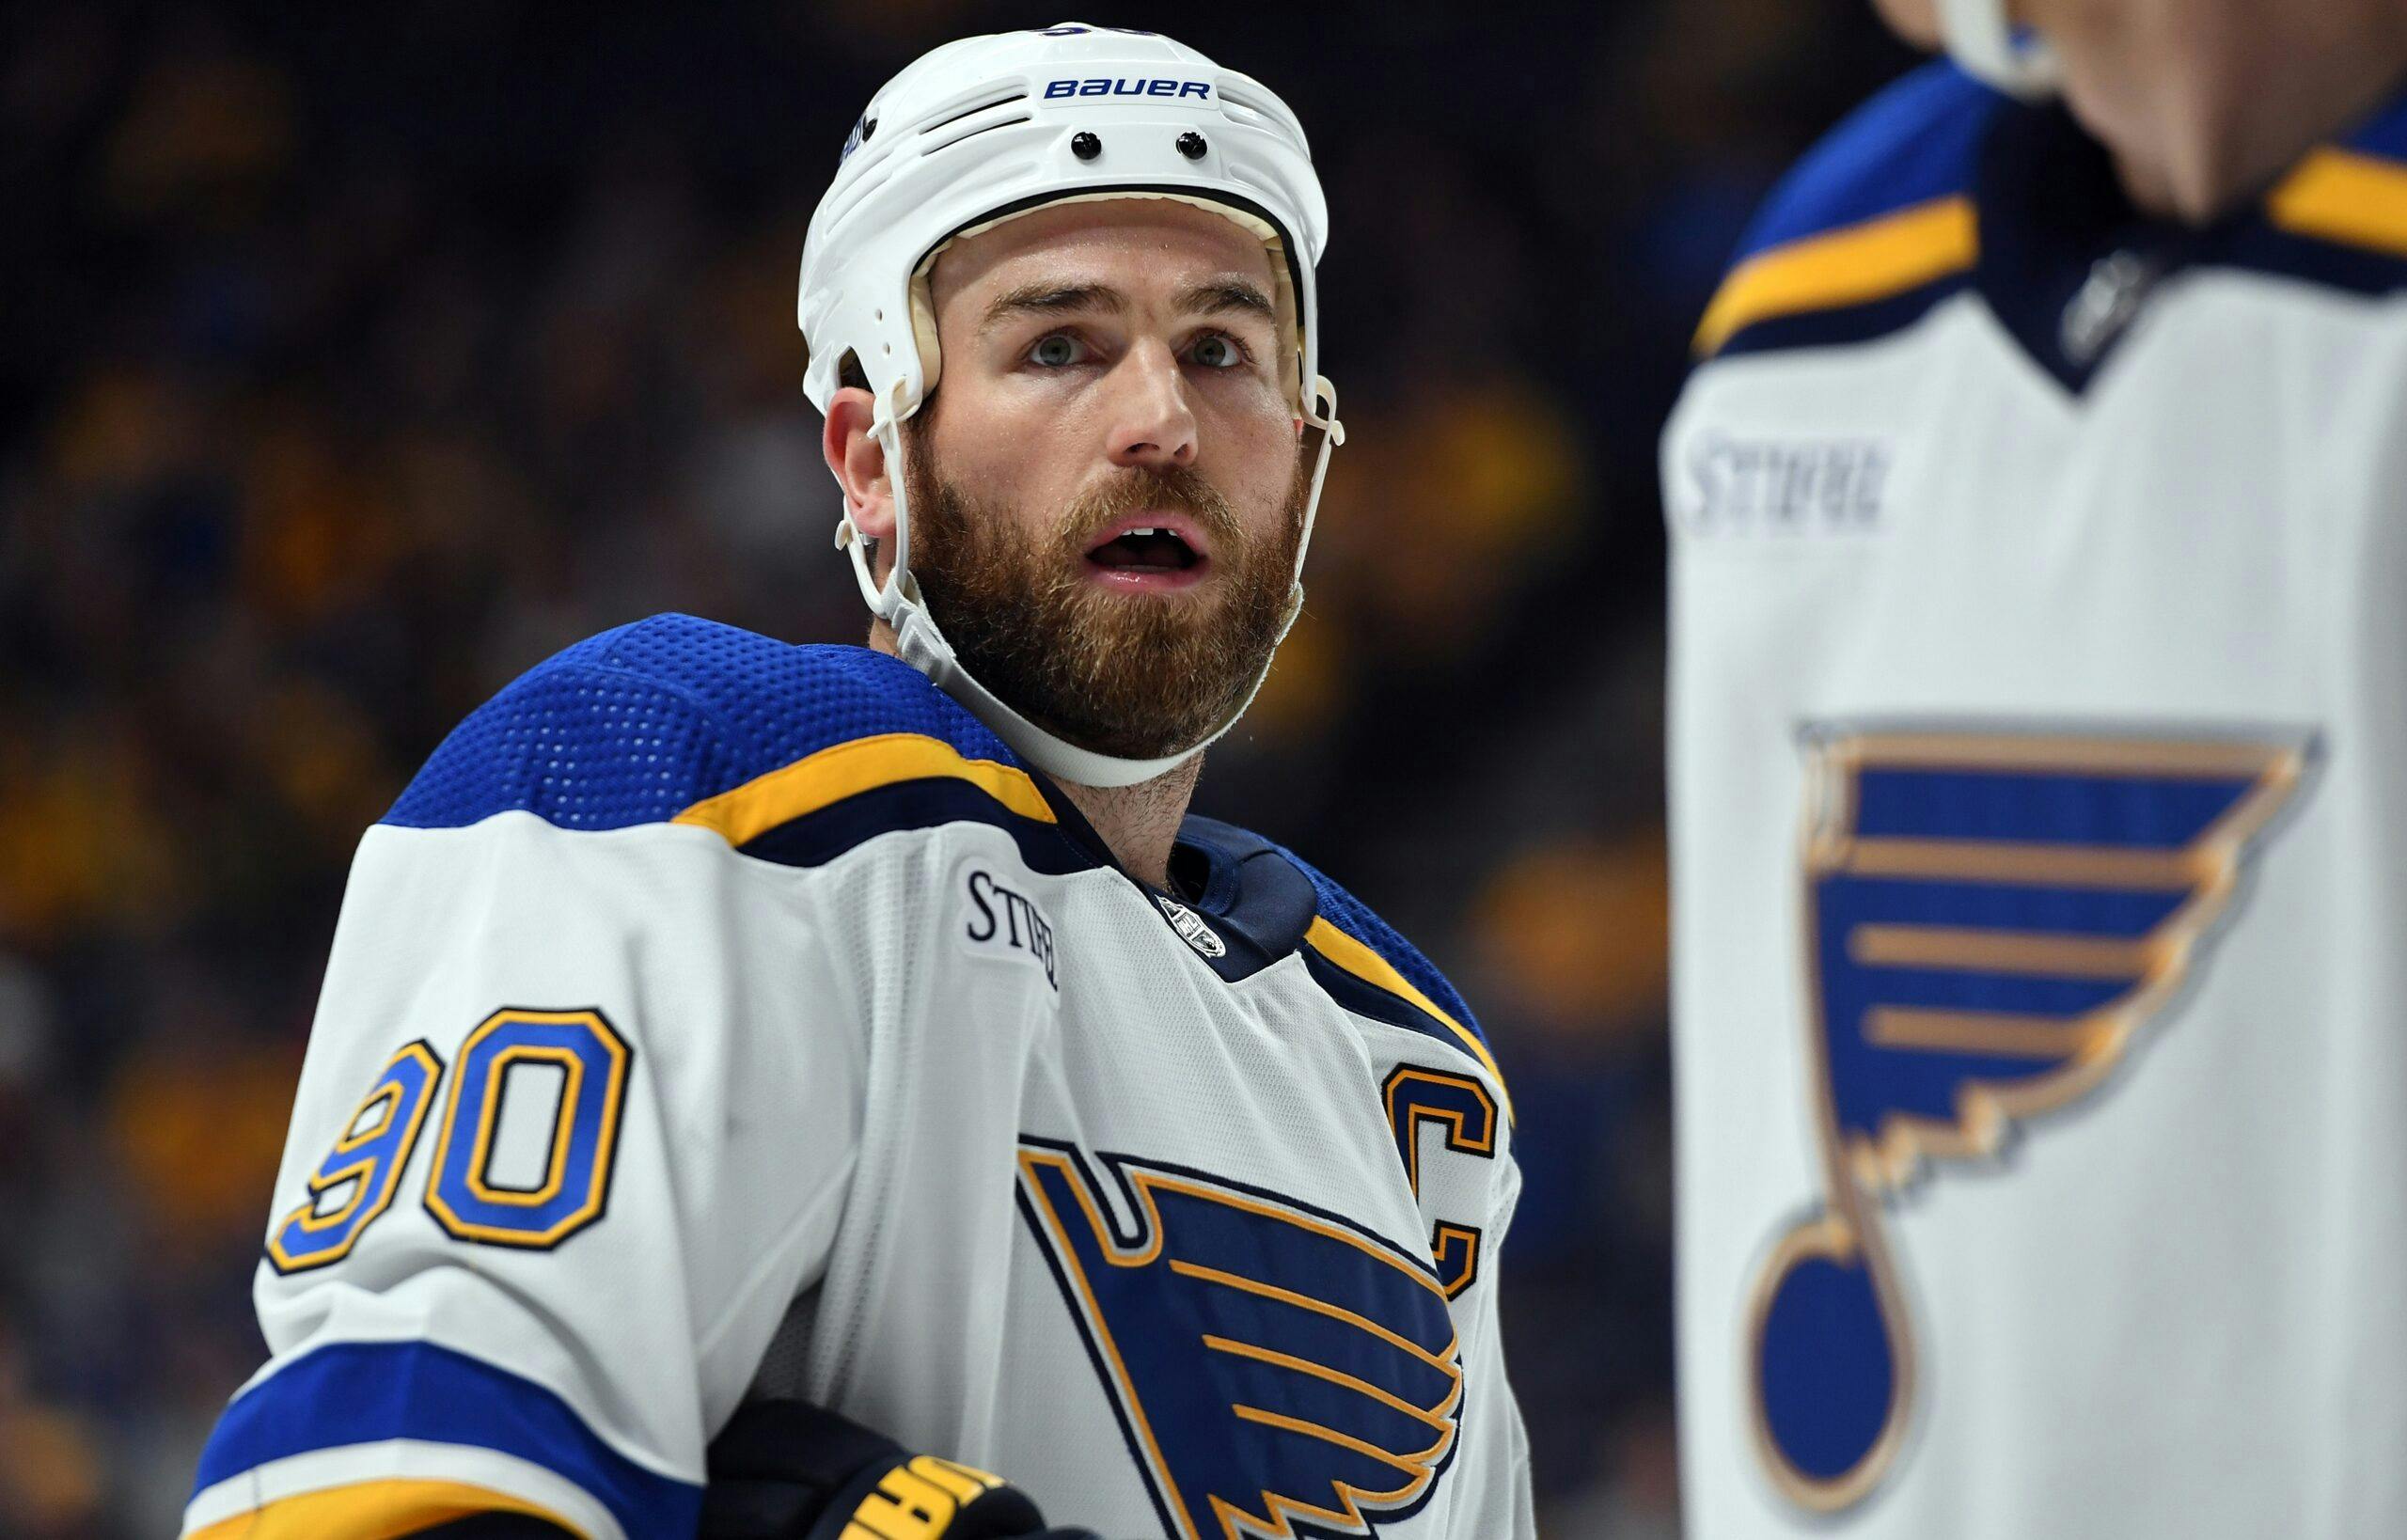 The Blues are back in the Stanley Cup Final after nearly 50 years of weird